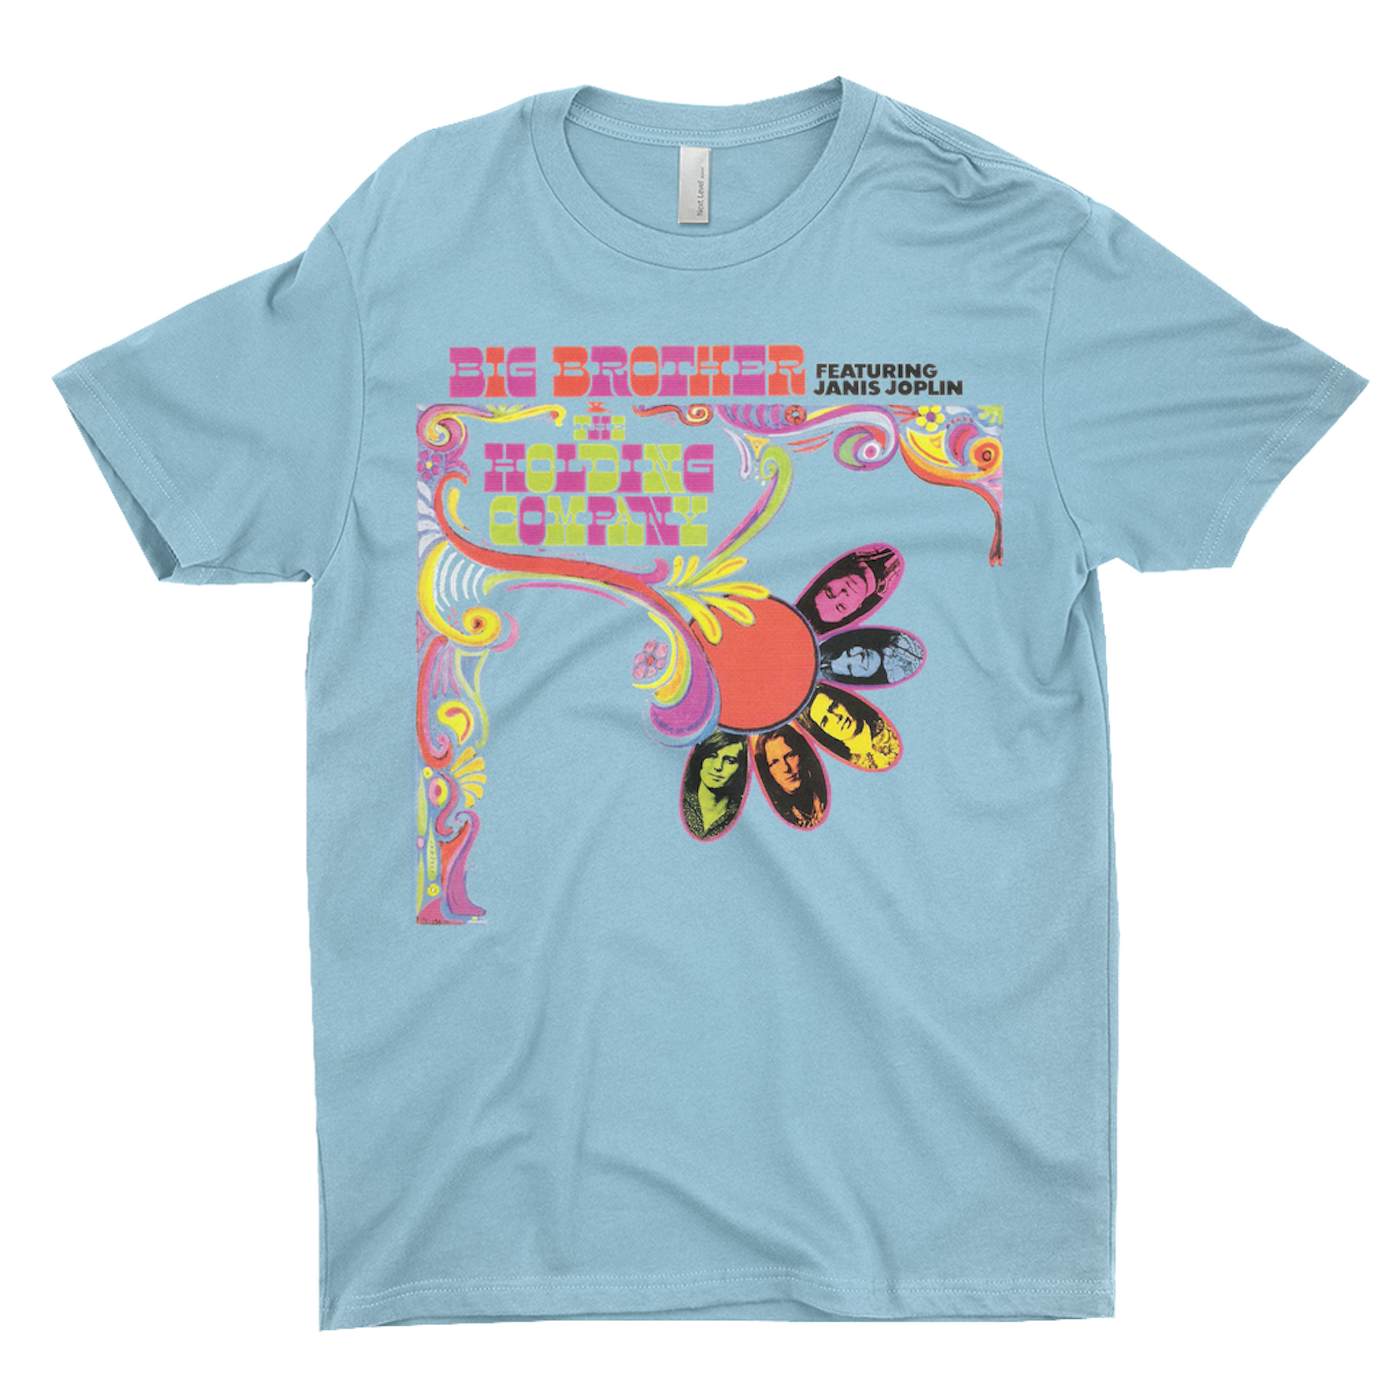 Big Brother and The Holding Co. T-Shirt | Big Brother & The Holding Company Feat. Janis Joplin Album Cover Big Brother and The Holding Co. Shirt